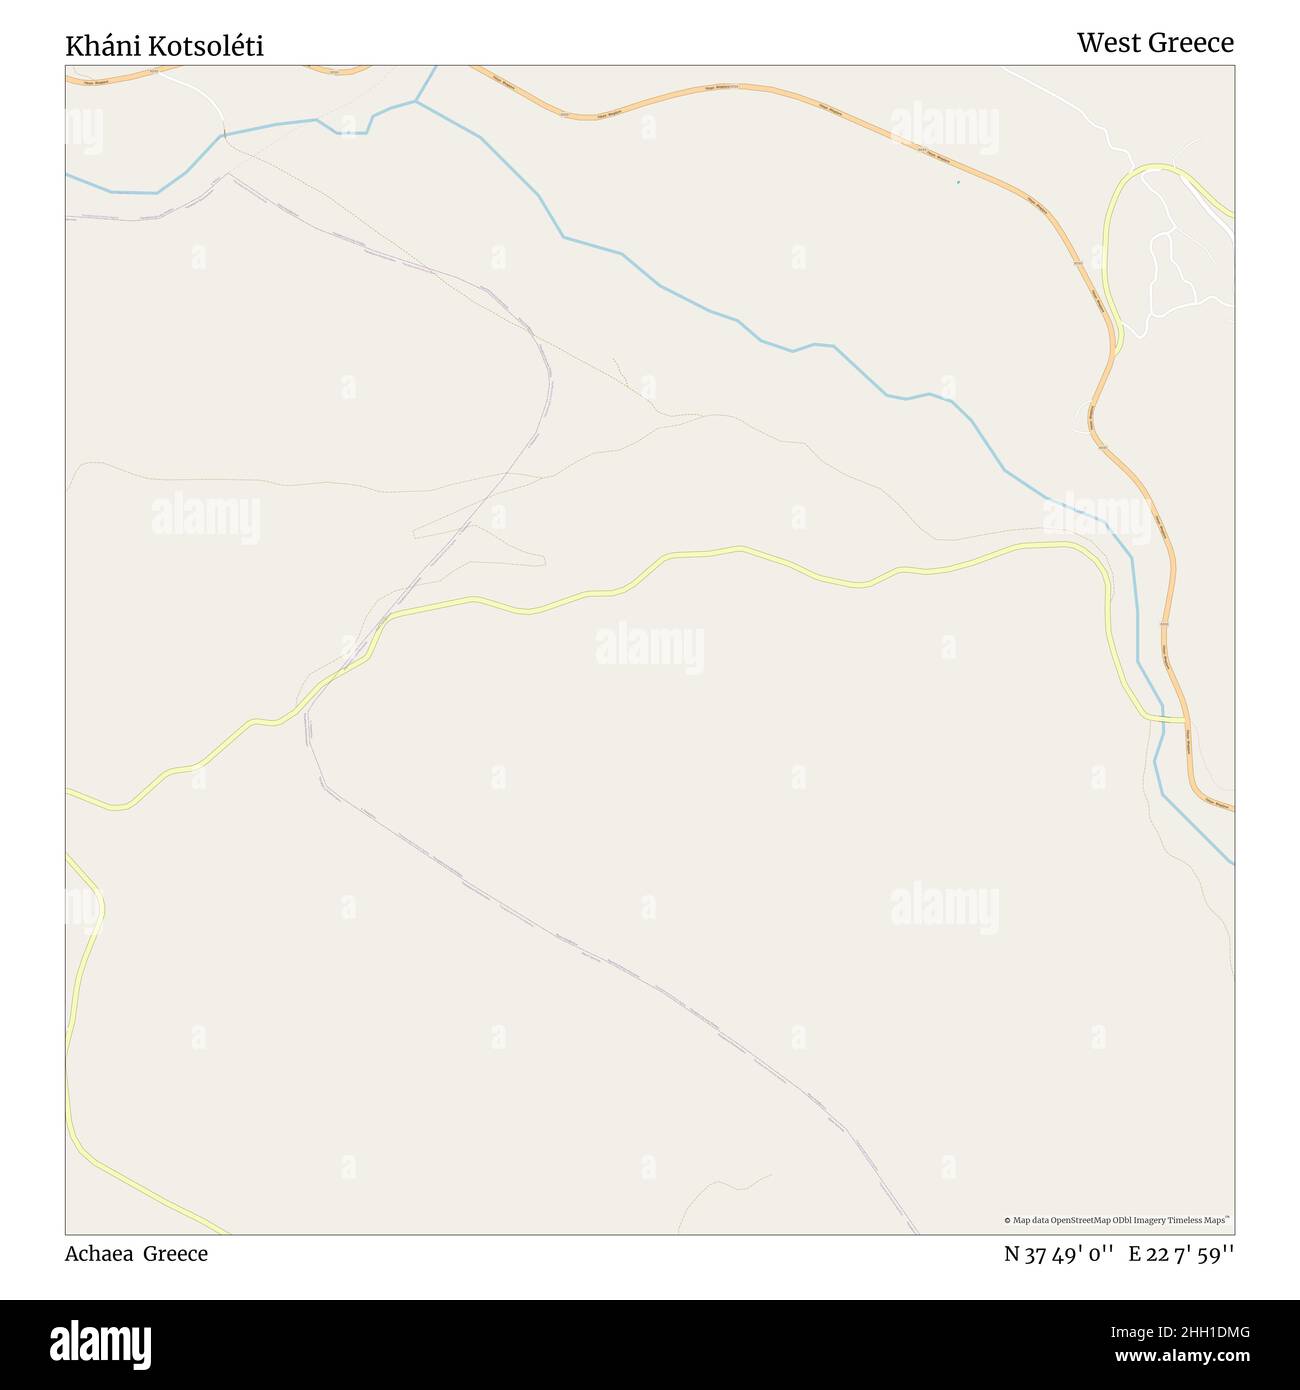 Kháni Kotsoléti, Achaea, Greece, West Greece, N 37 49' 0'', E 22 7' 59'', map, Timeless Map published in 2021. Travelers, explorers and adventurers like Florence Nightingale, David Livingstone, Ernest Shackleton, Lewis and Clark and Sherlock Holmes relied on maps to plan travels to the world's most remote corners, Timeless Maps is mapping most locations on the globe, showing the achievement of great dreams Stock Photo